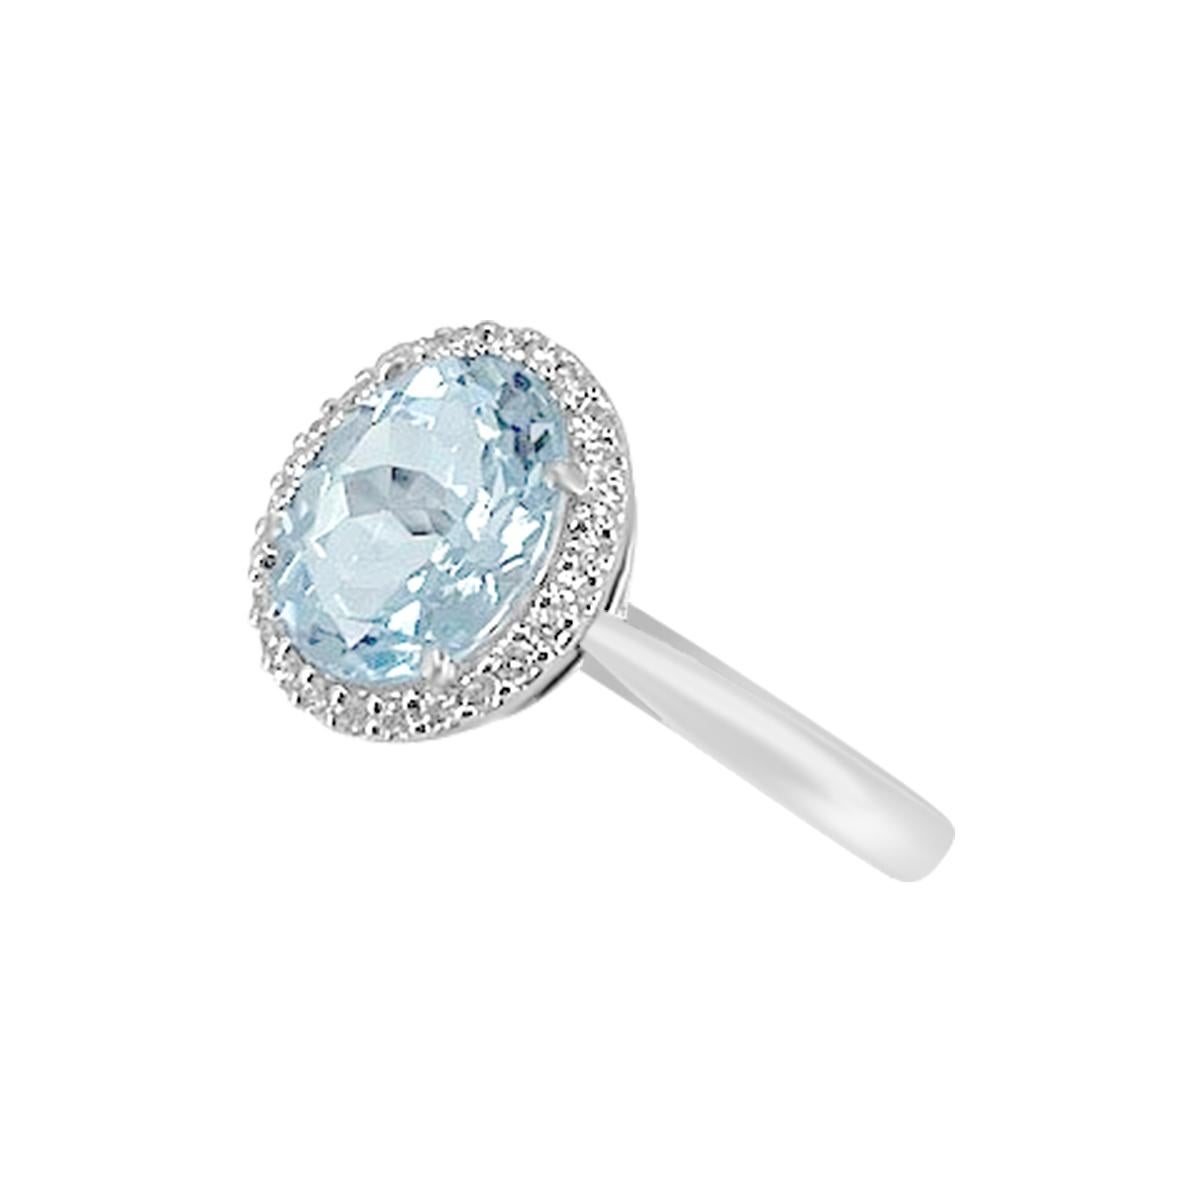 A Truly Stunning Ring!
Featuring A 9x7mm Icy Blue Oval Aquamarine Of 1.74Cts For A Glamorous And Elegant Look This Beautiful Piece Is Crafted In 14K White Gold.
Aquamarines Make For The Perfect Engagement Rings, Wedding Rings Or As A Gift To